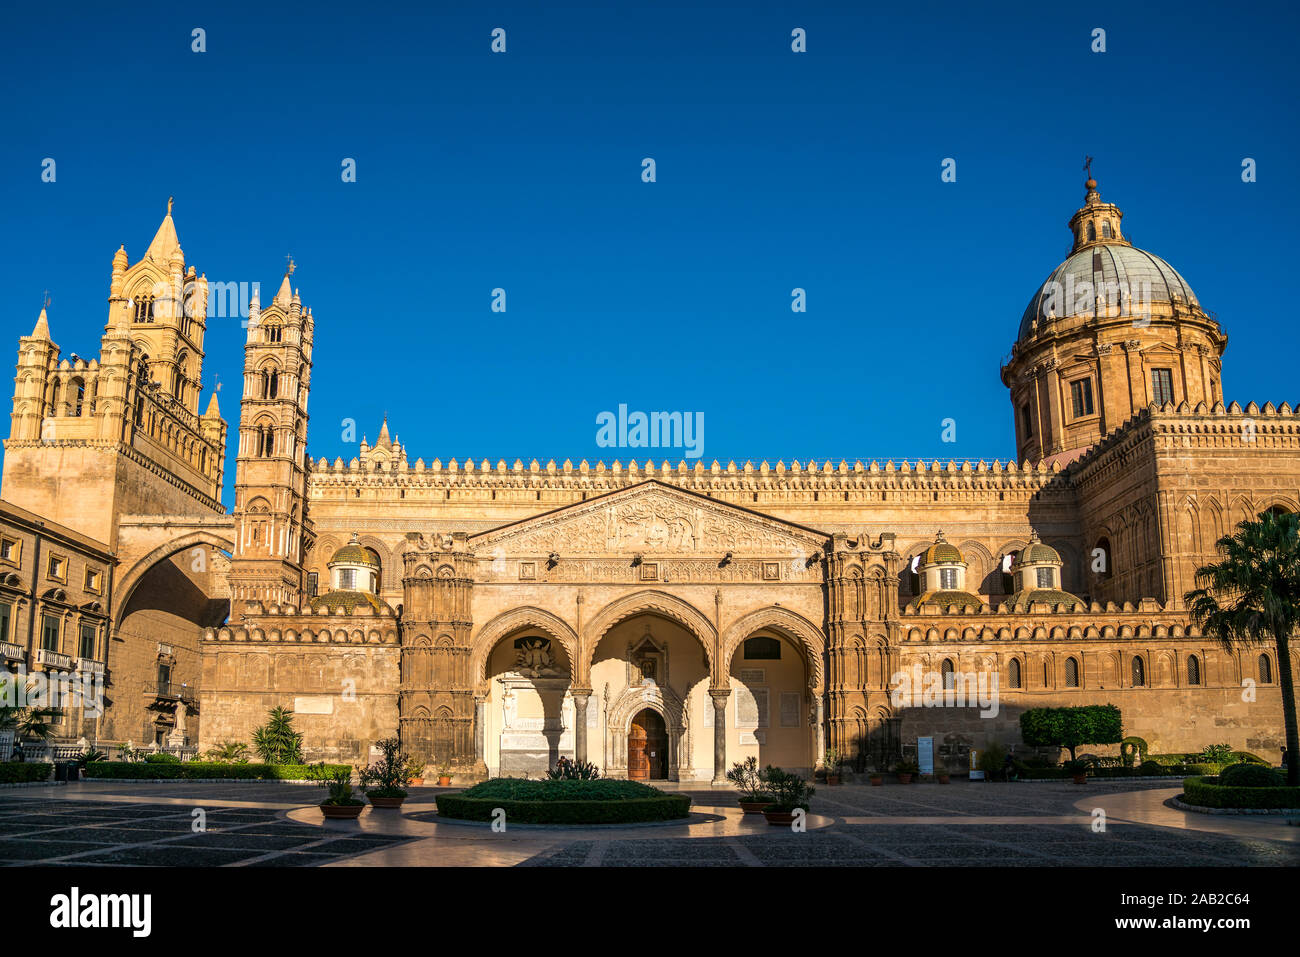 Kathedrale Maria Santissima Assunta,  Palermo, Sizilien, Italien, Europa  |  Cathedral of the Assumption of Virgin Mary, Palermo, Sicily, Italy, Europ Stock Photo